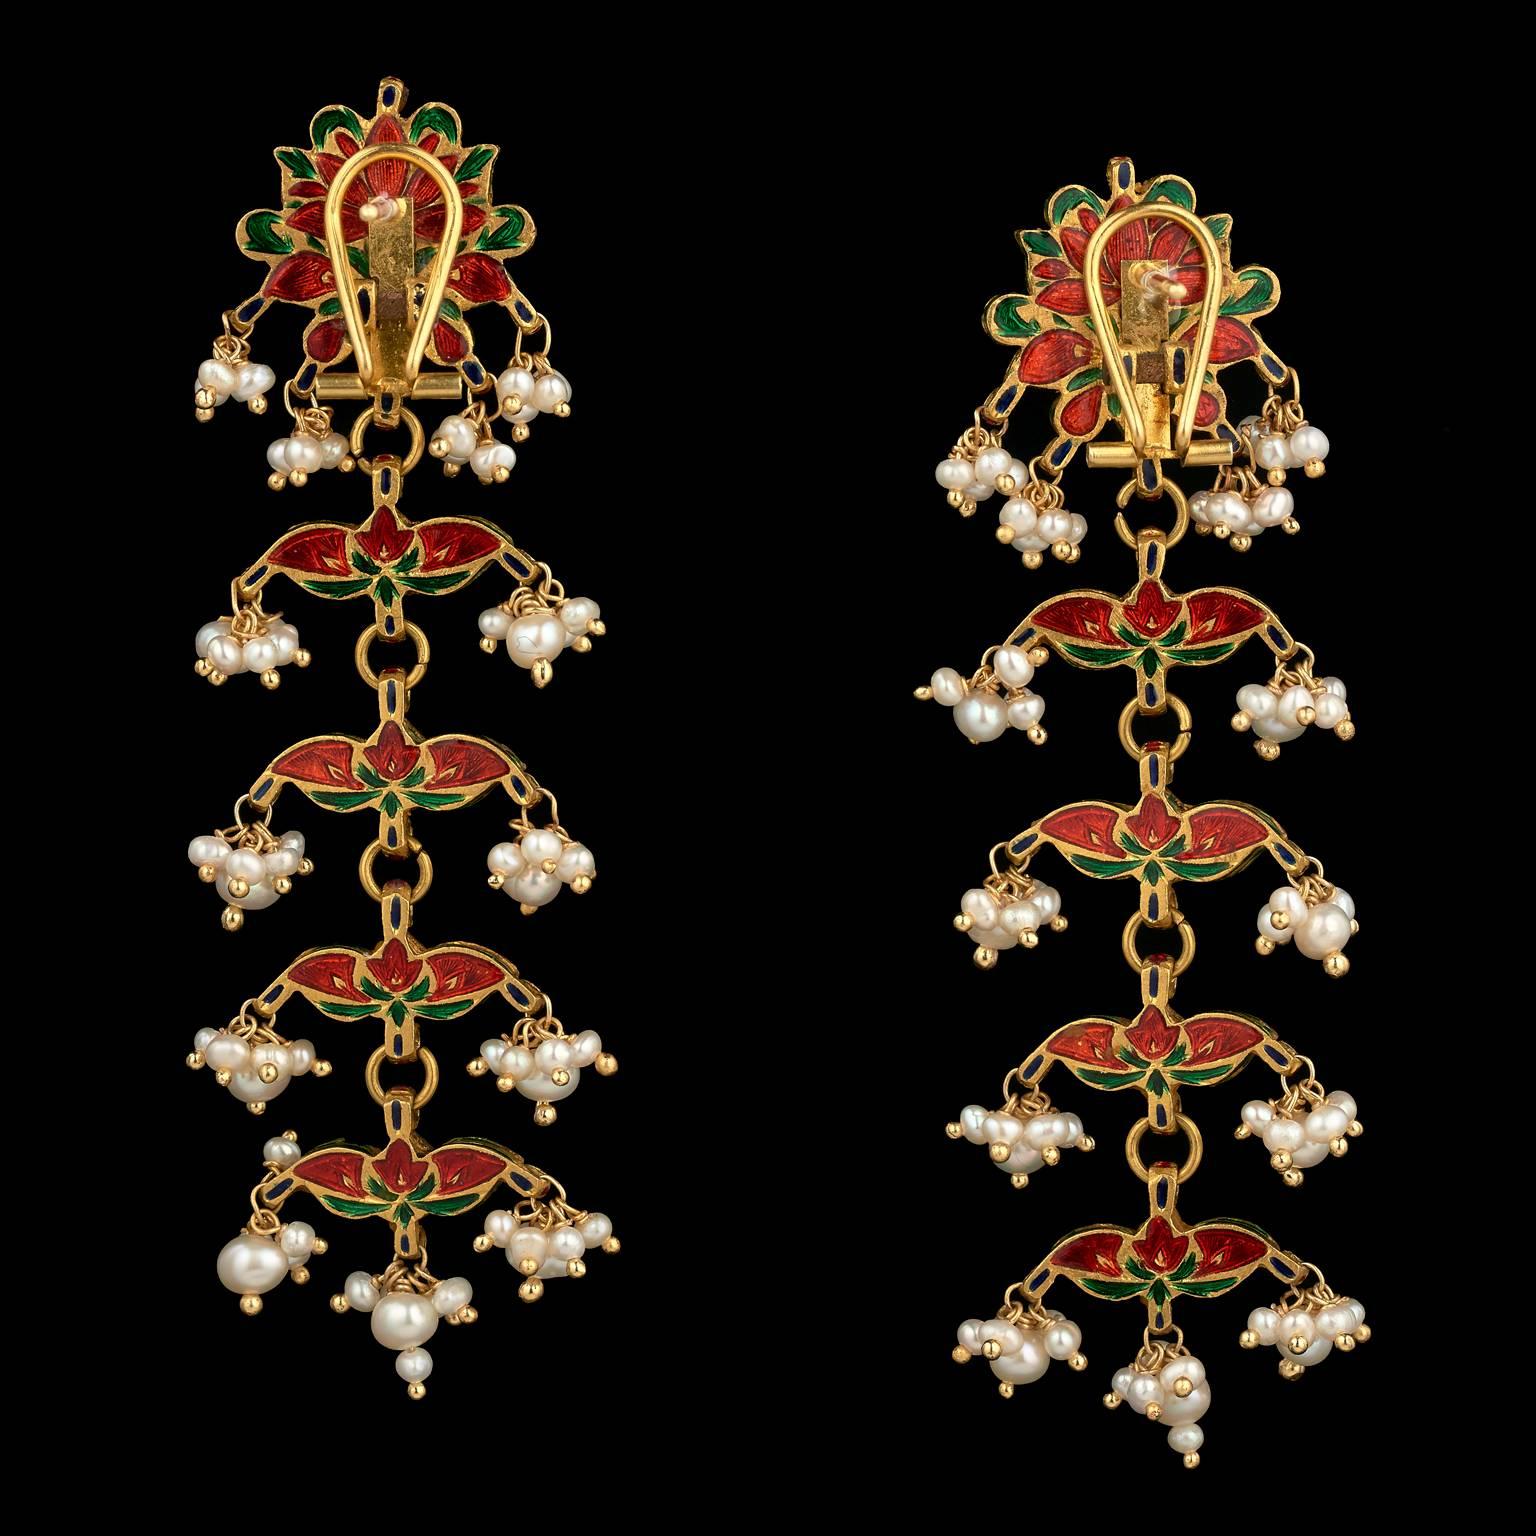 A pair of earrings made in Rajasthan, India (probably Jaipur) in the 19th century. Fabricated from gold and set in kundan (traditional pure gold setting) technique with diamonds, strung with natural pearls. The reverse is enamelled in red on gold.